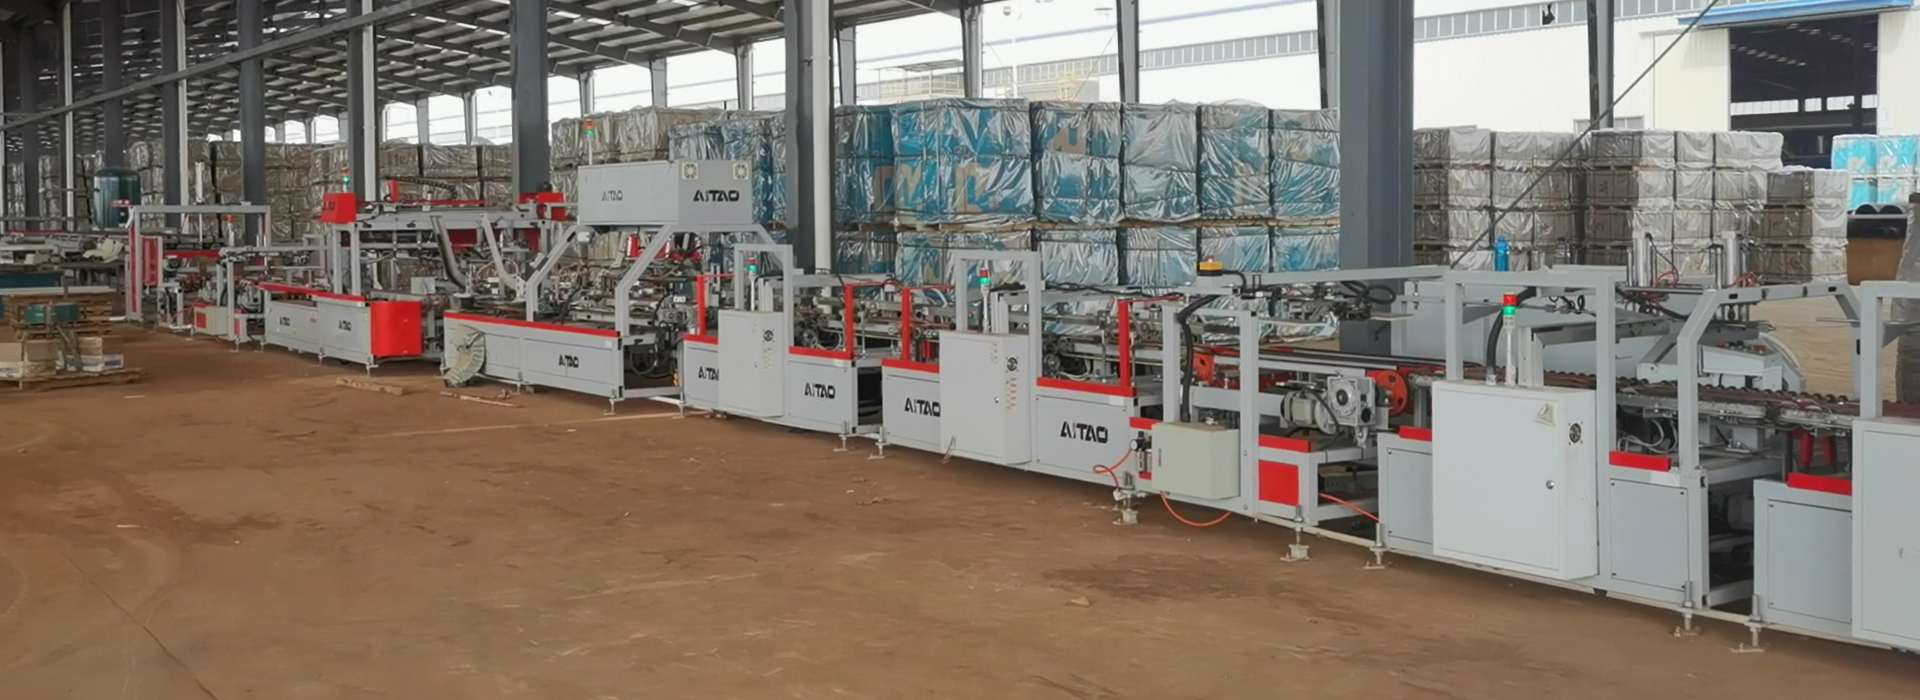 FULLY_AUTOMATIC_CERAMIC_TILE_PACKAGING_PRODUCTION_LINE